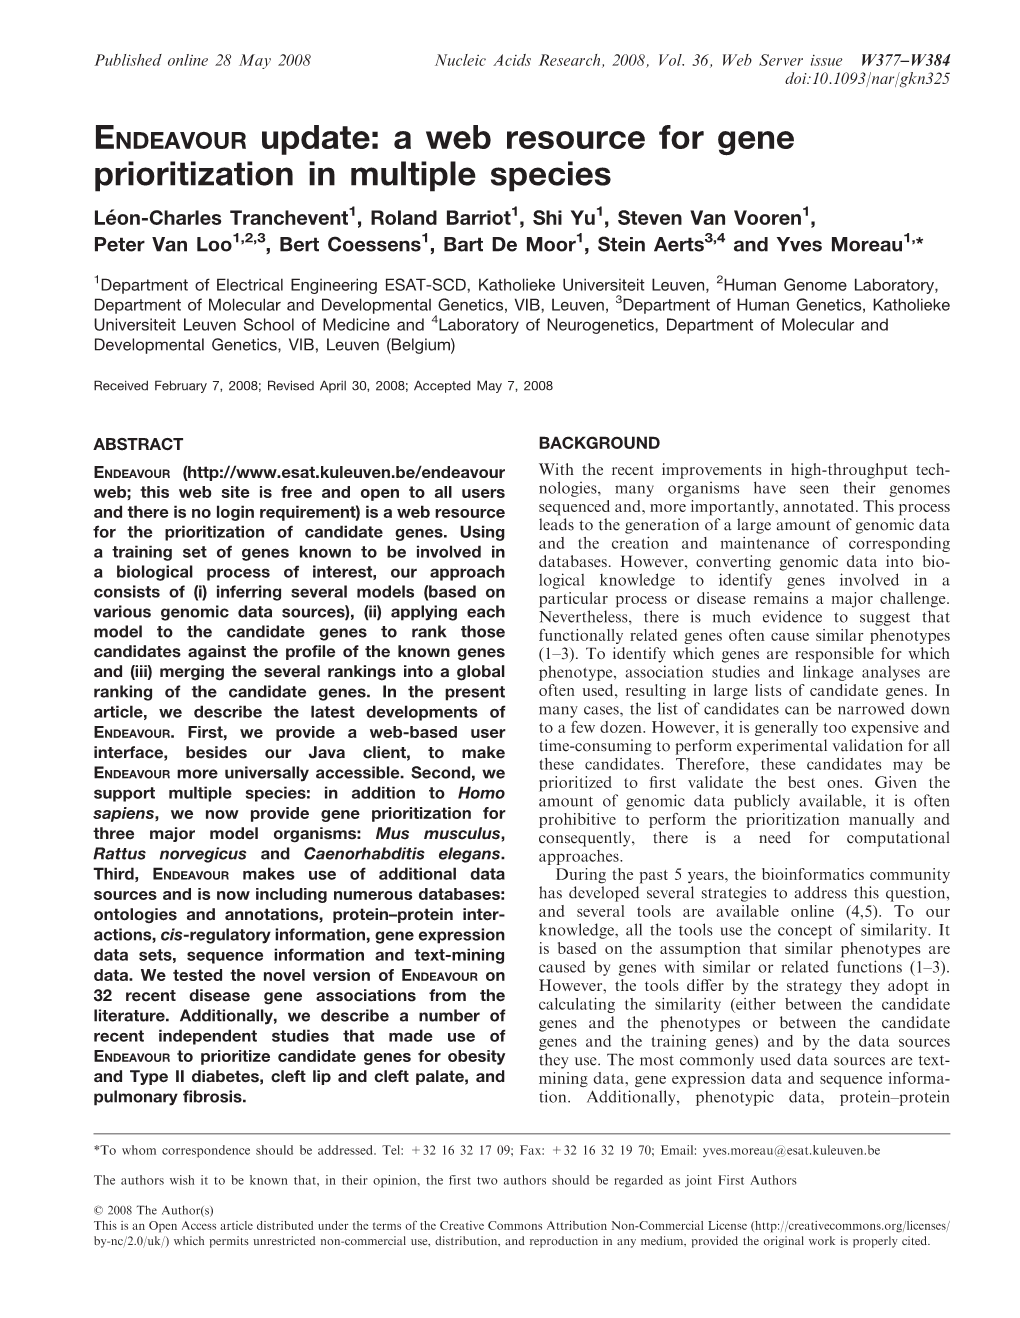 A Web Resource for Gene Prioritization in Multiple Species